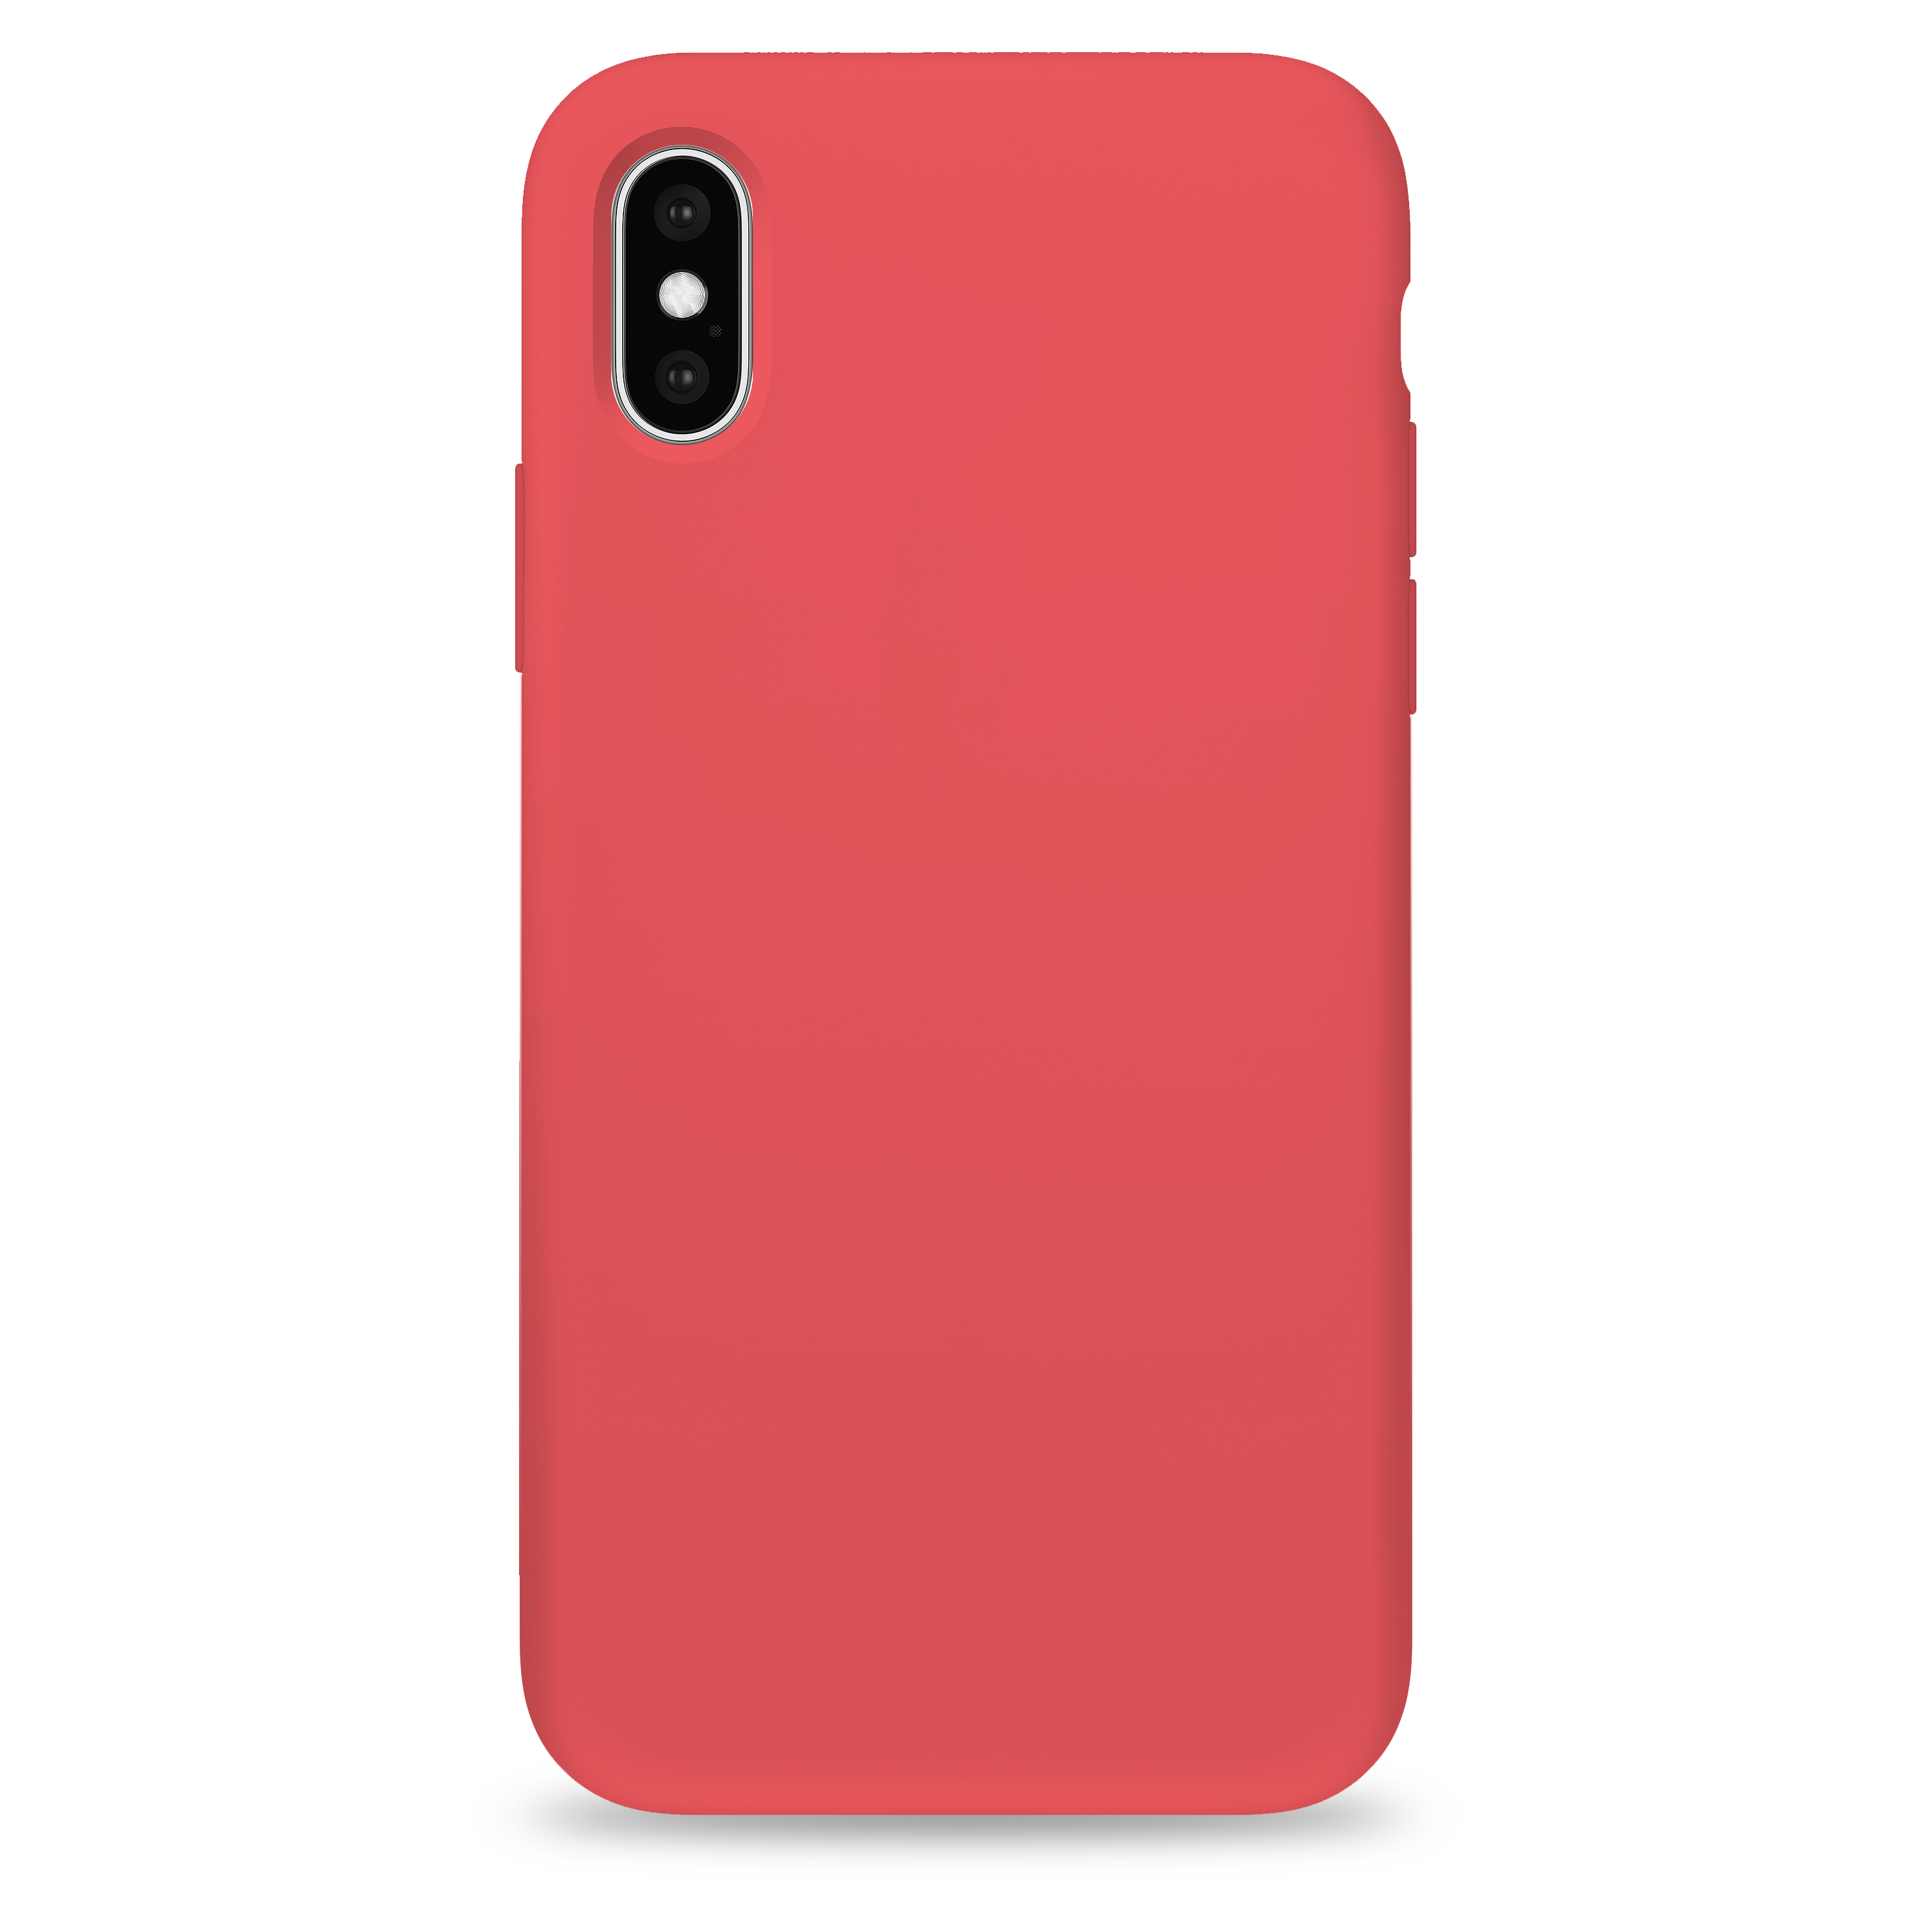 iPhone XS Max silicone case